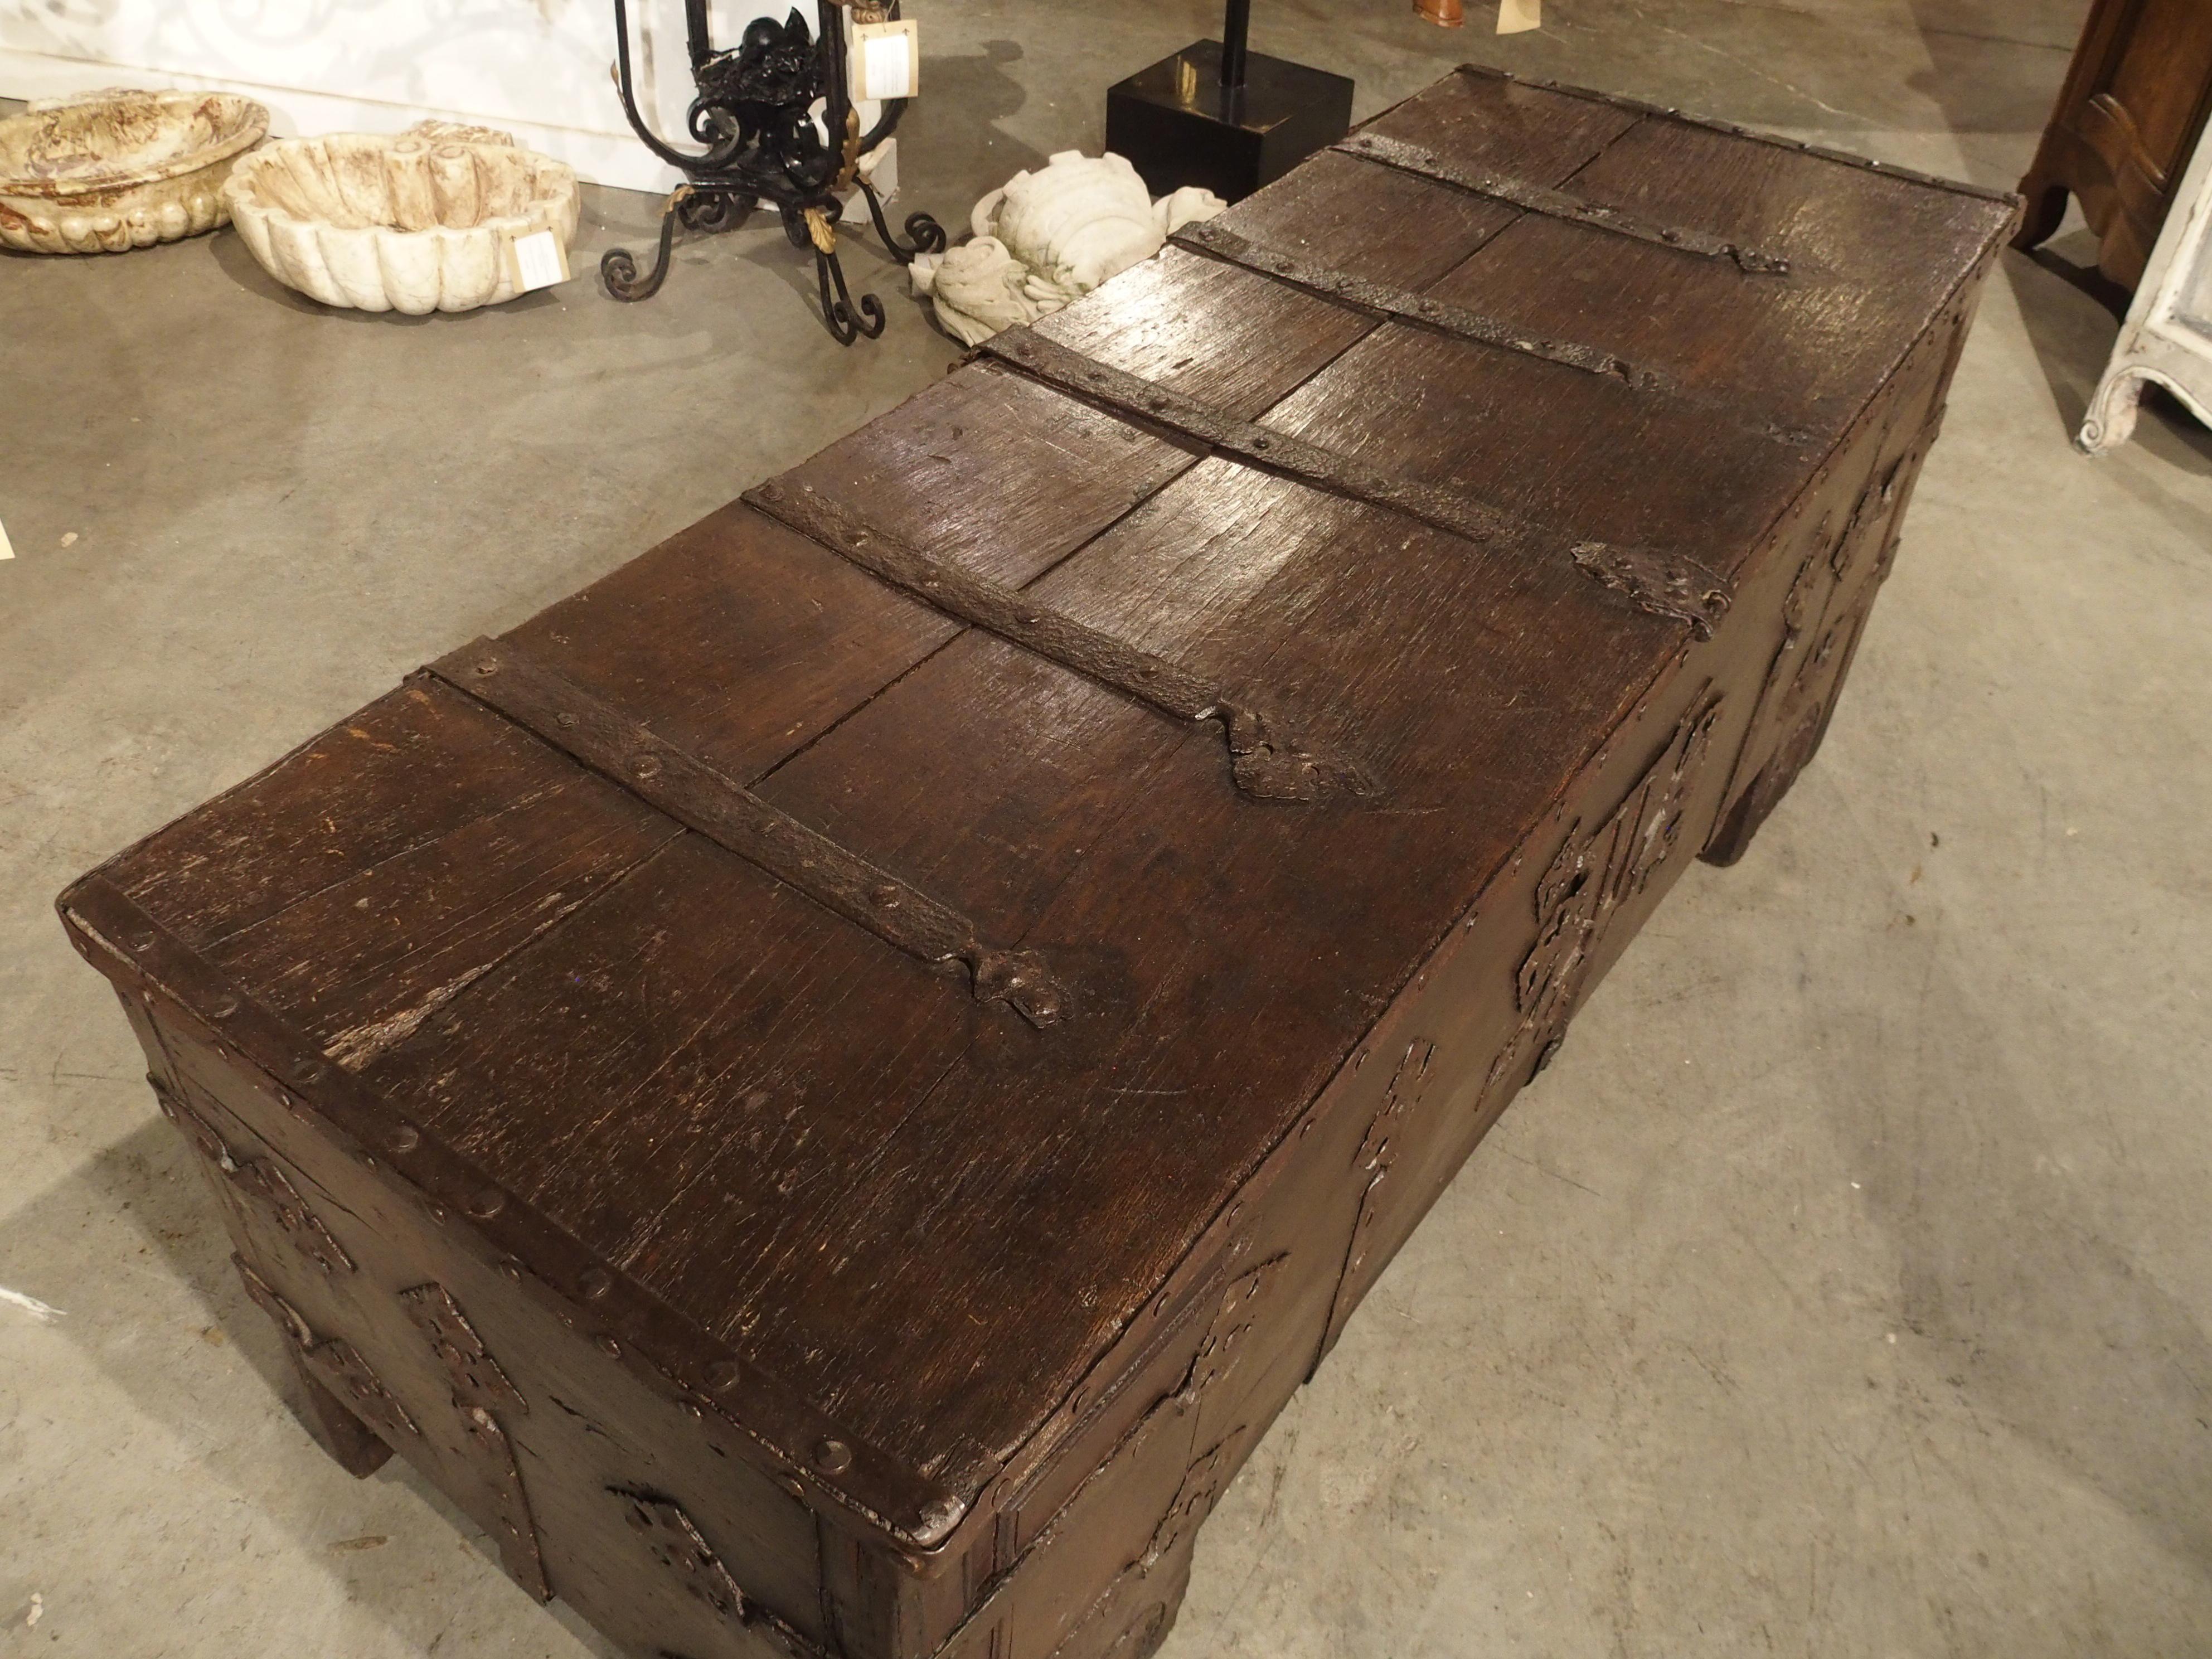 Hand-Carved Rare 16th Century Oak and Iron “Stollentruhe” Trunk from Westphalia, Germany